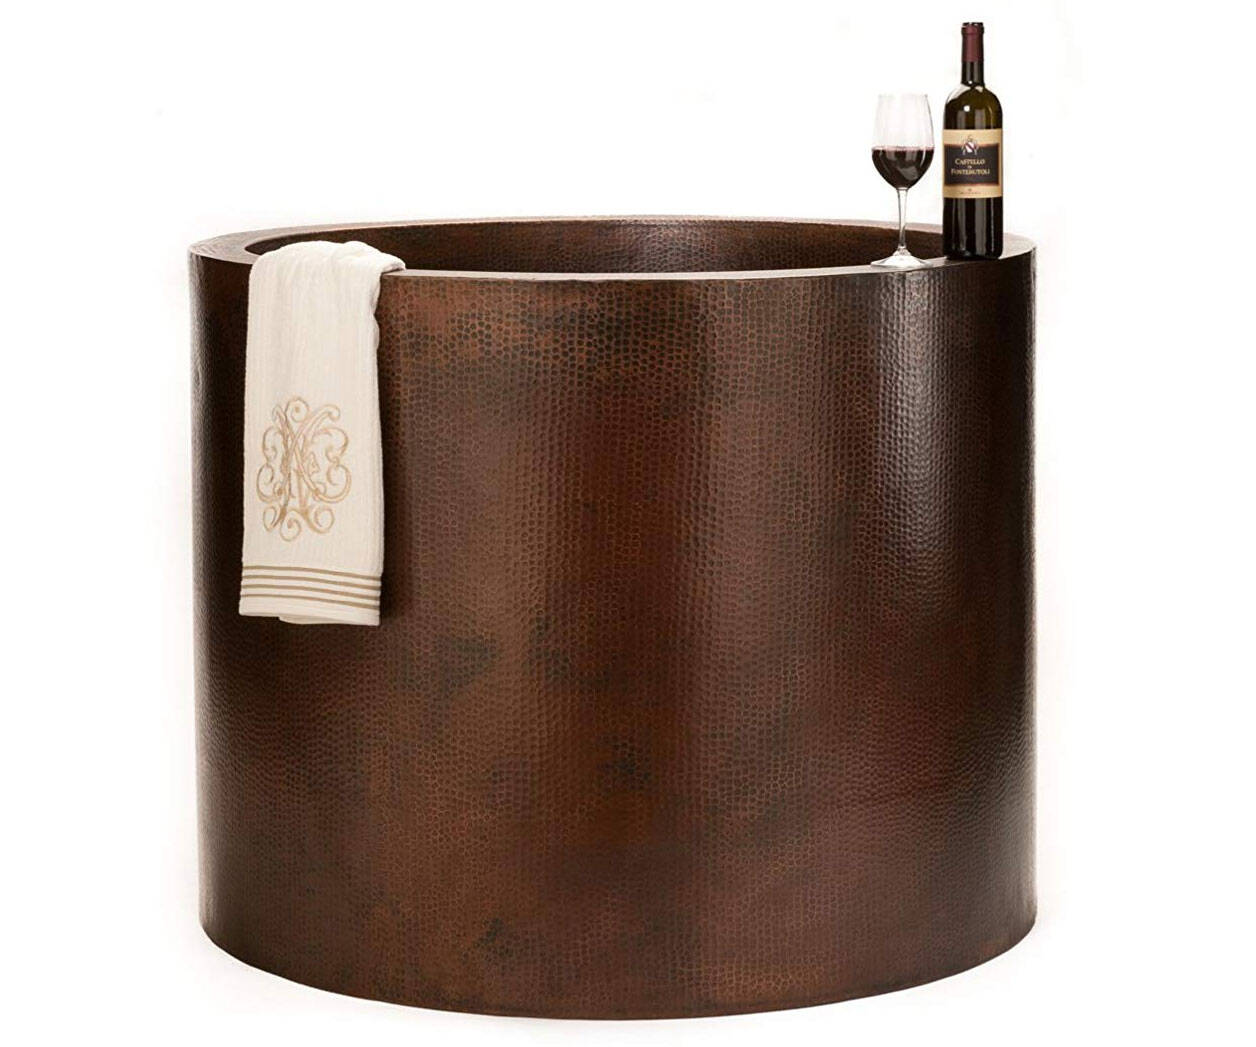 Hammered Copper Soaking Tub - //coolthings.us